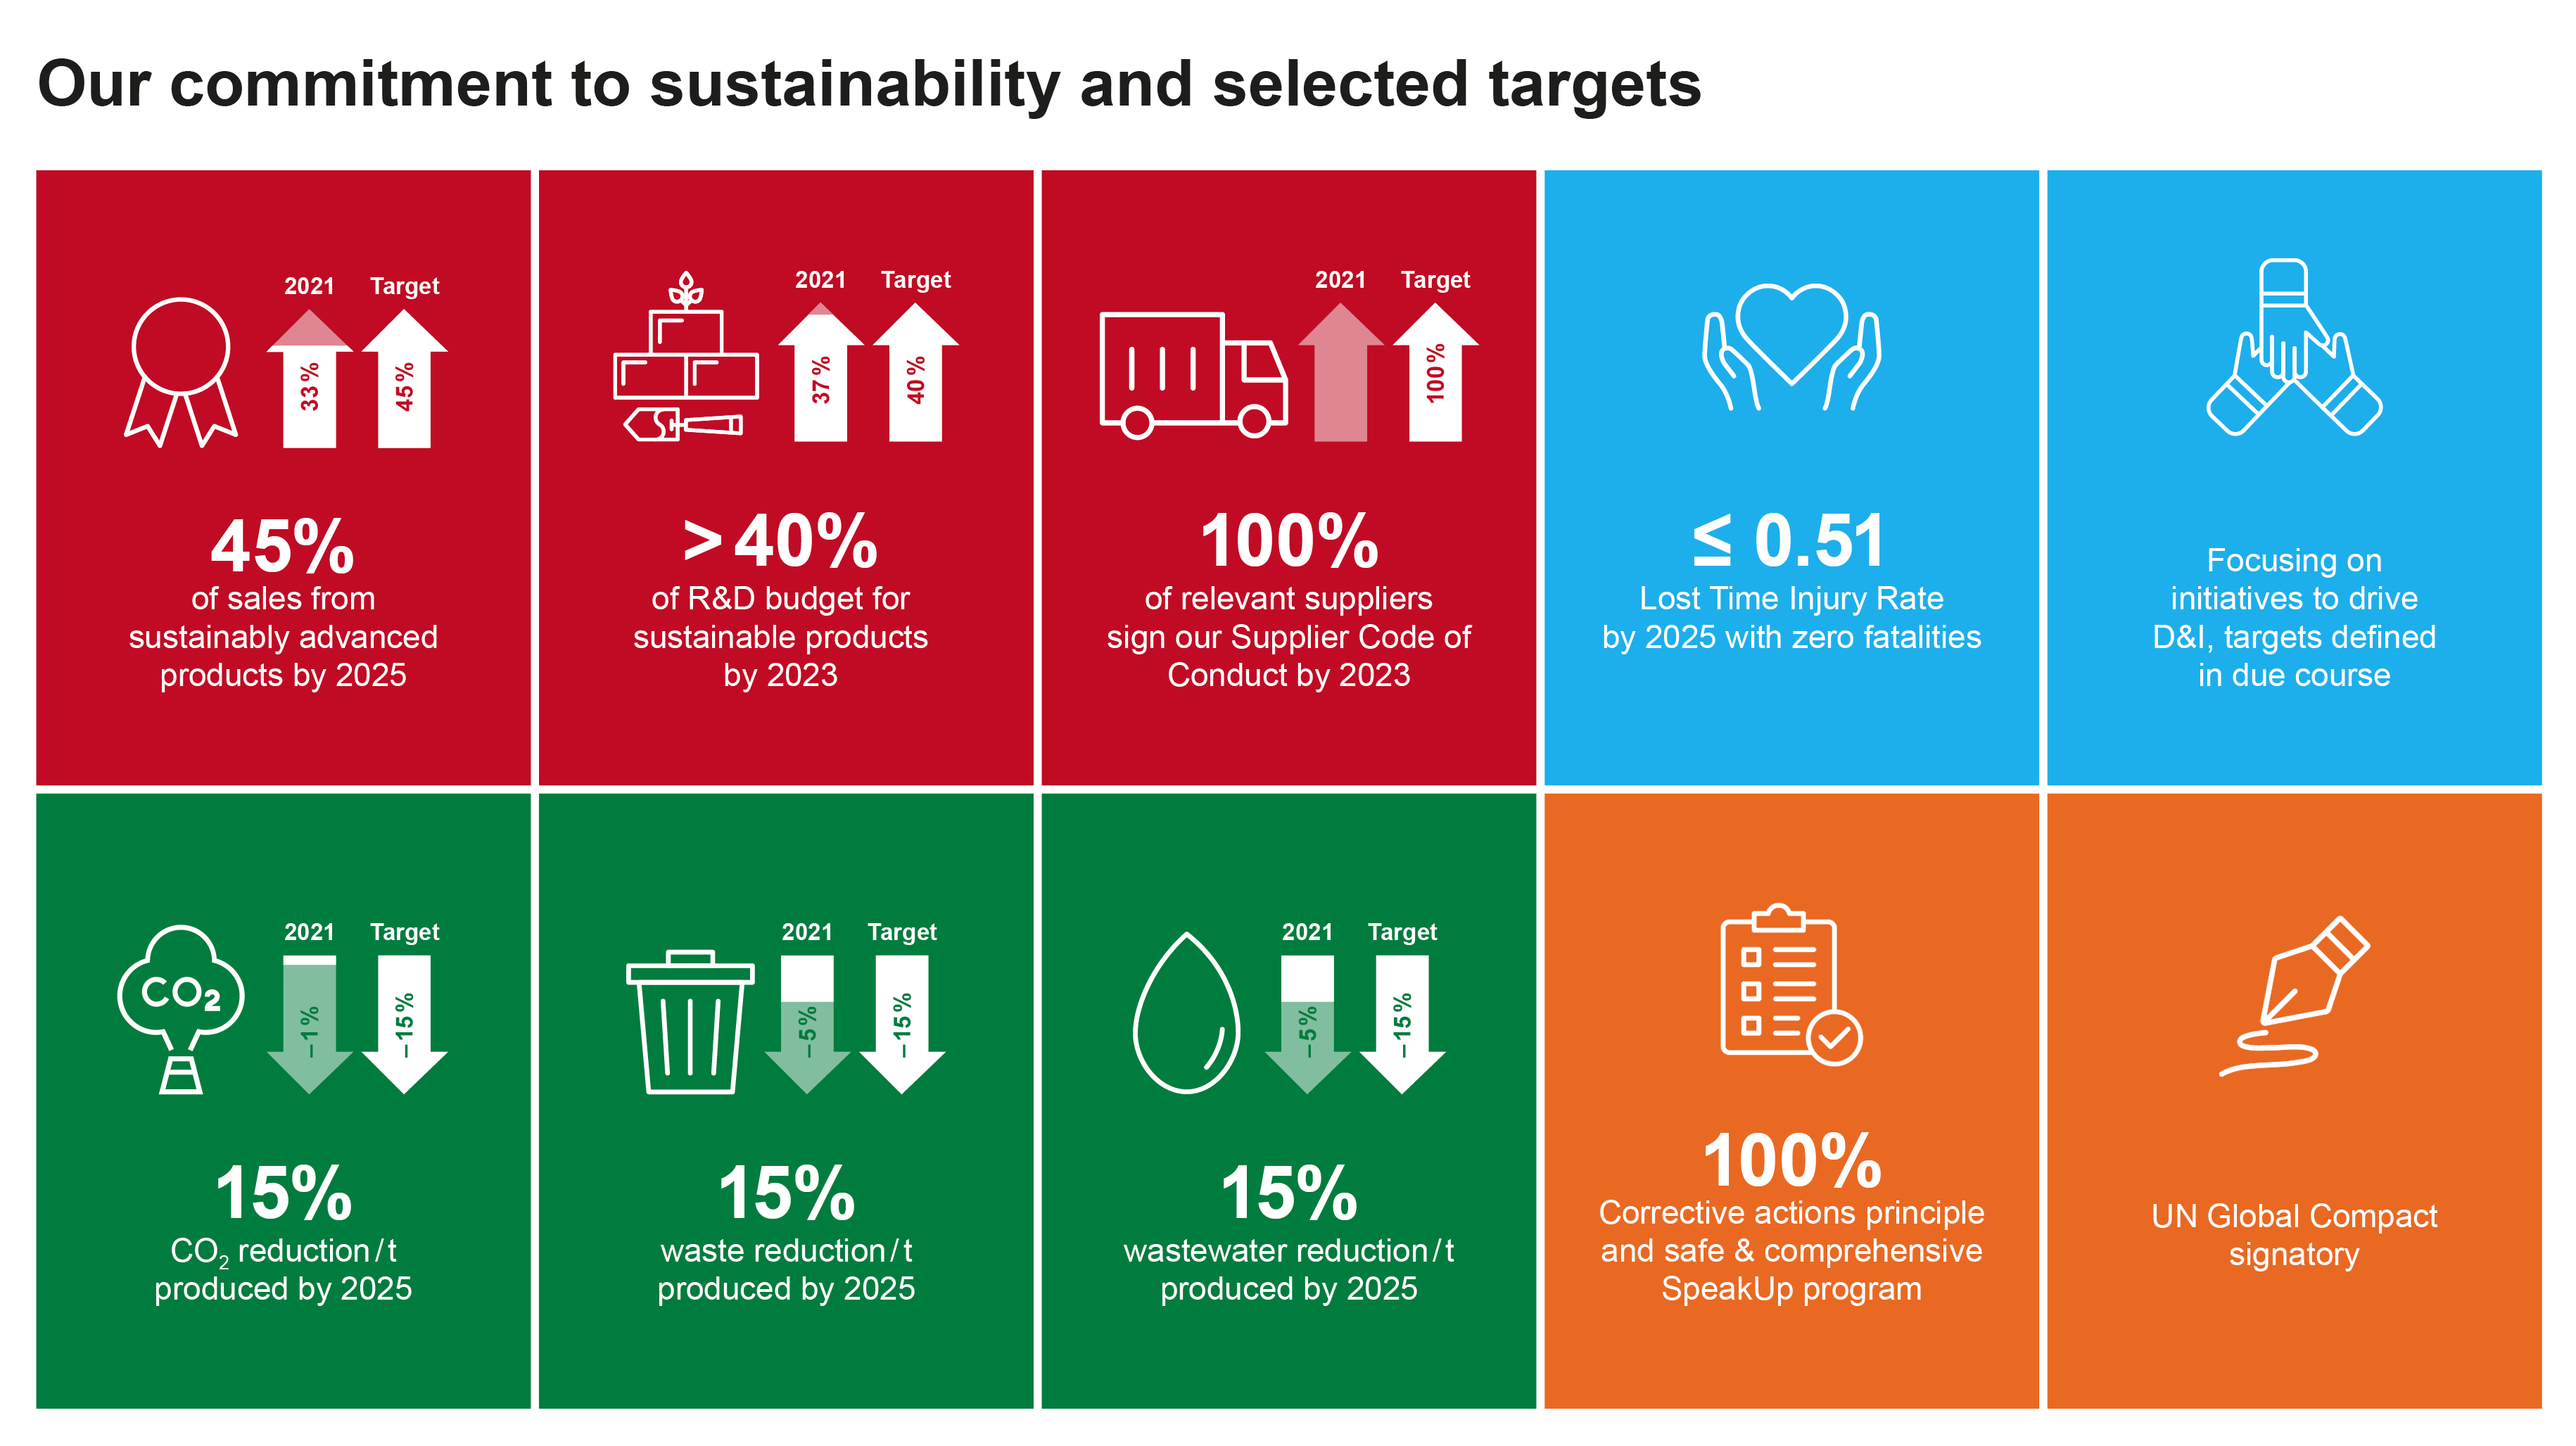 Made to measure: Sustainability commitment progress and updates